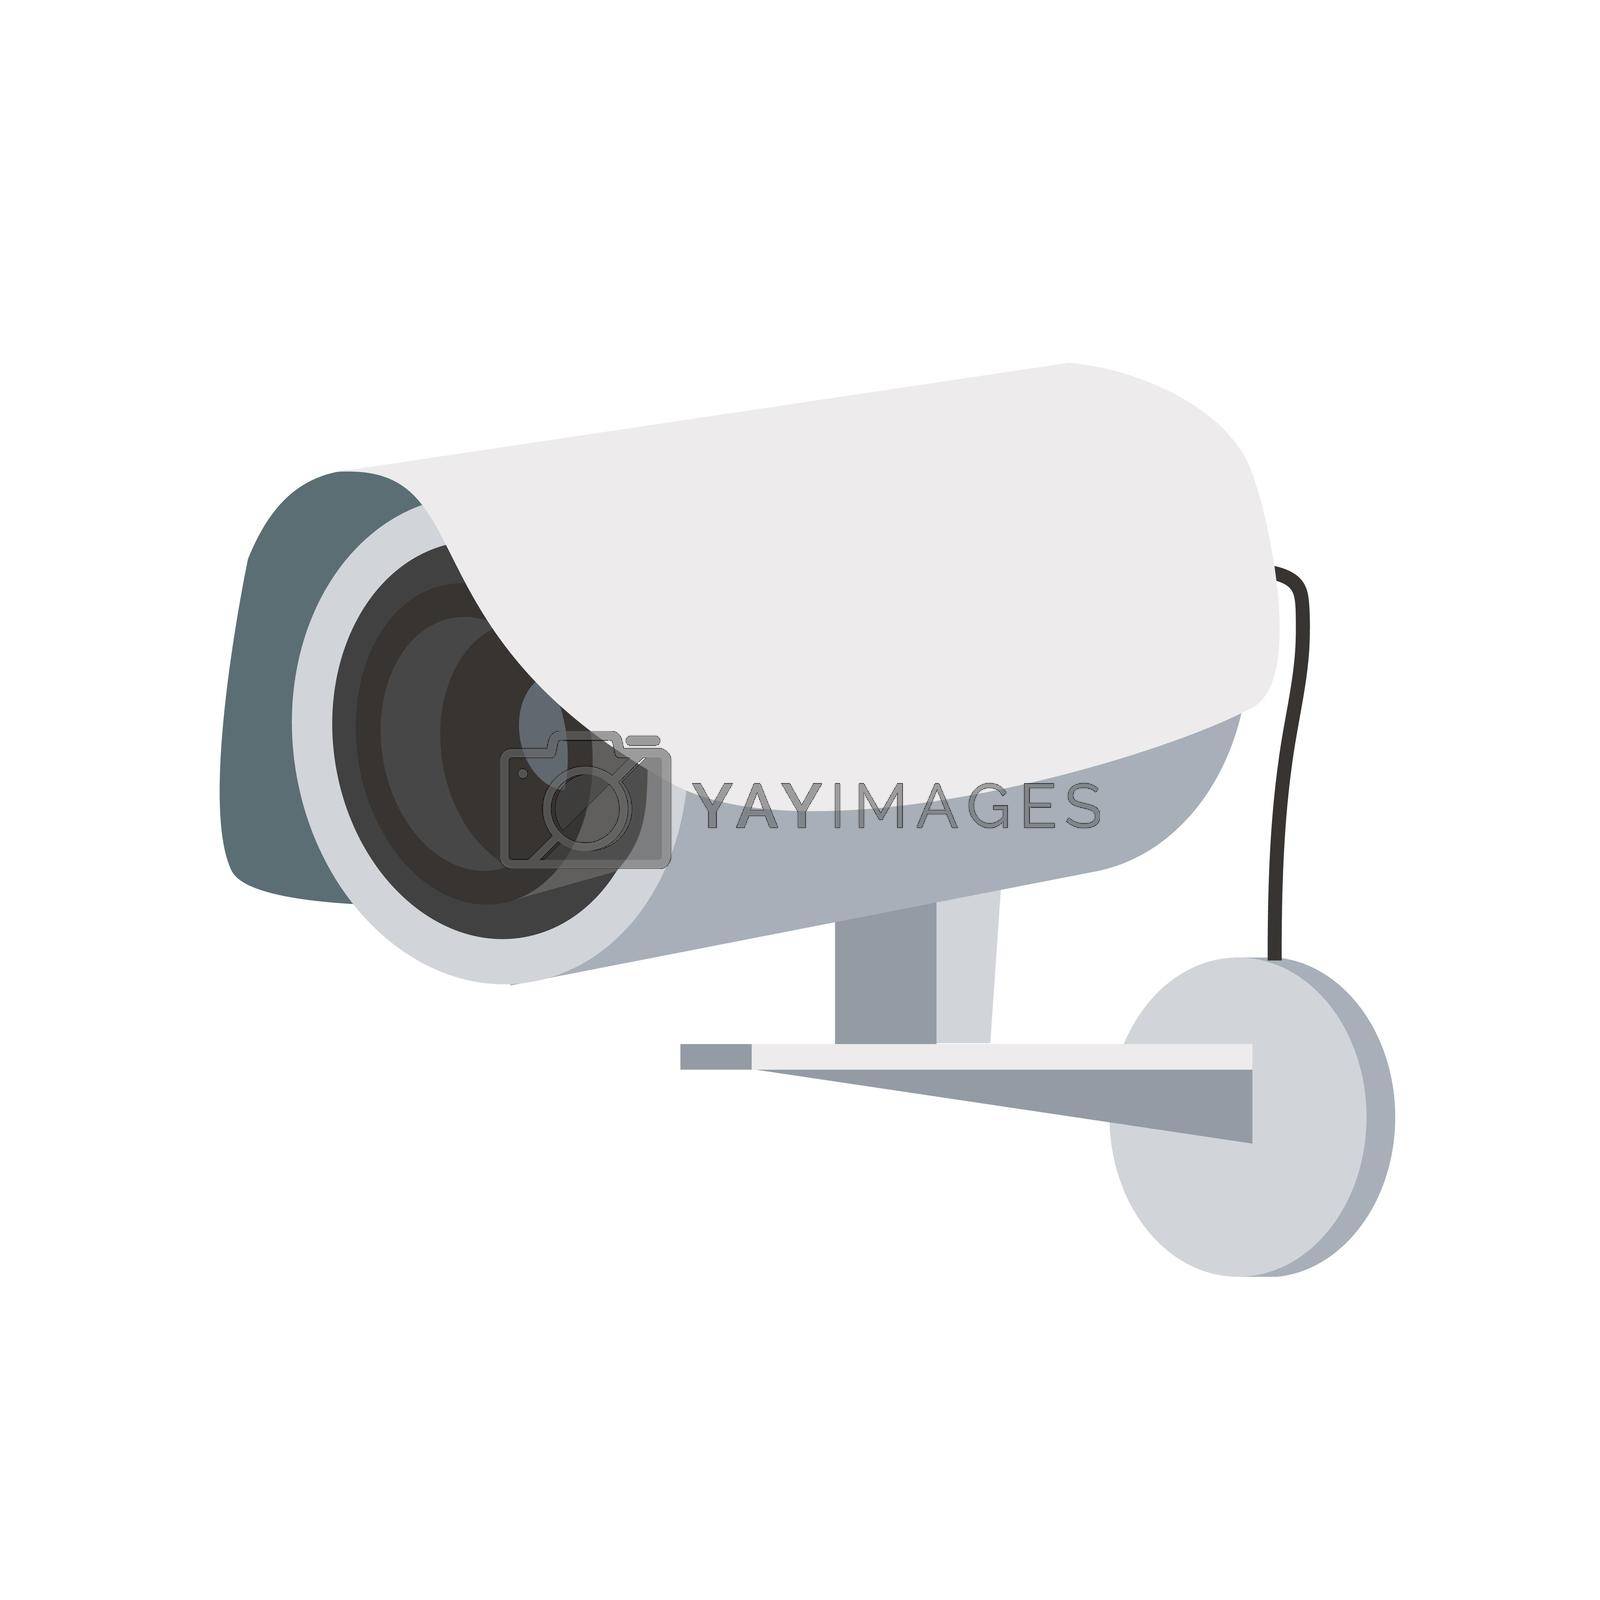 Royalty free image of hanging CCTV Security camera  Icon  by focus_bell